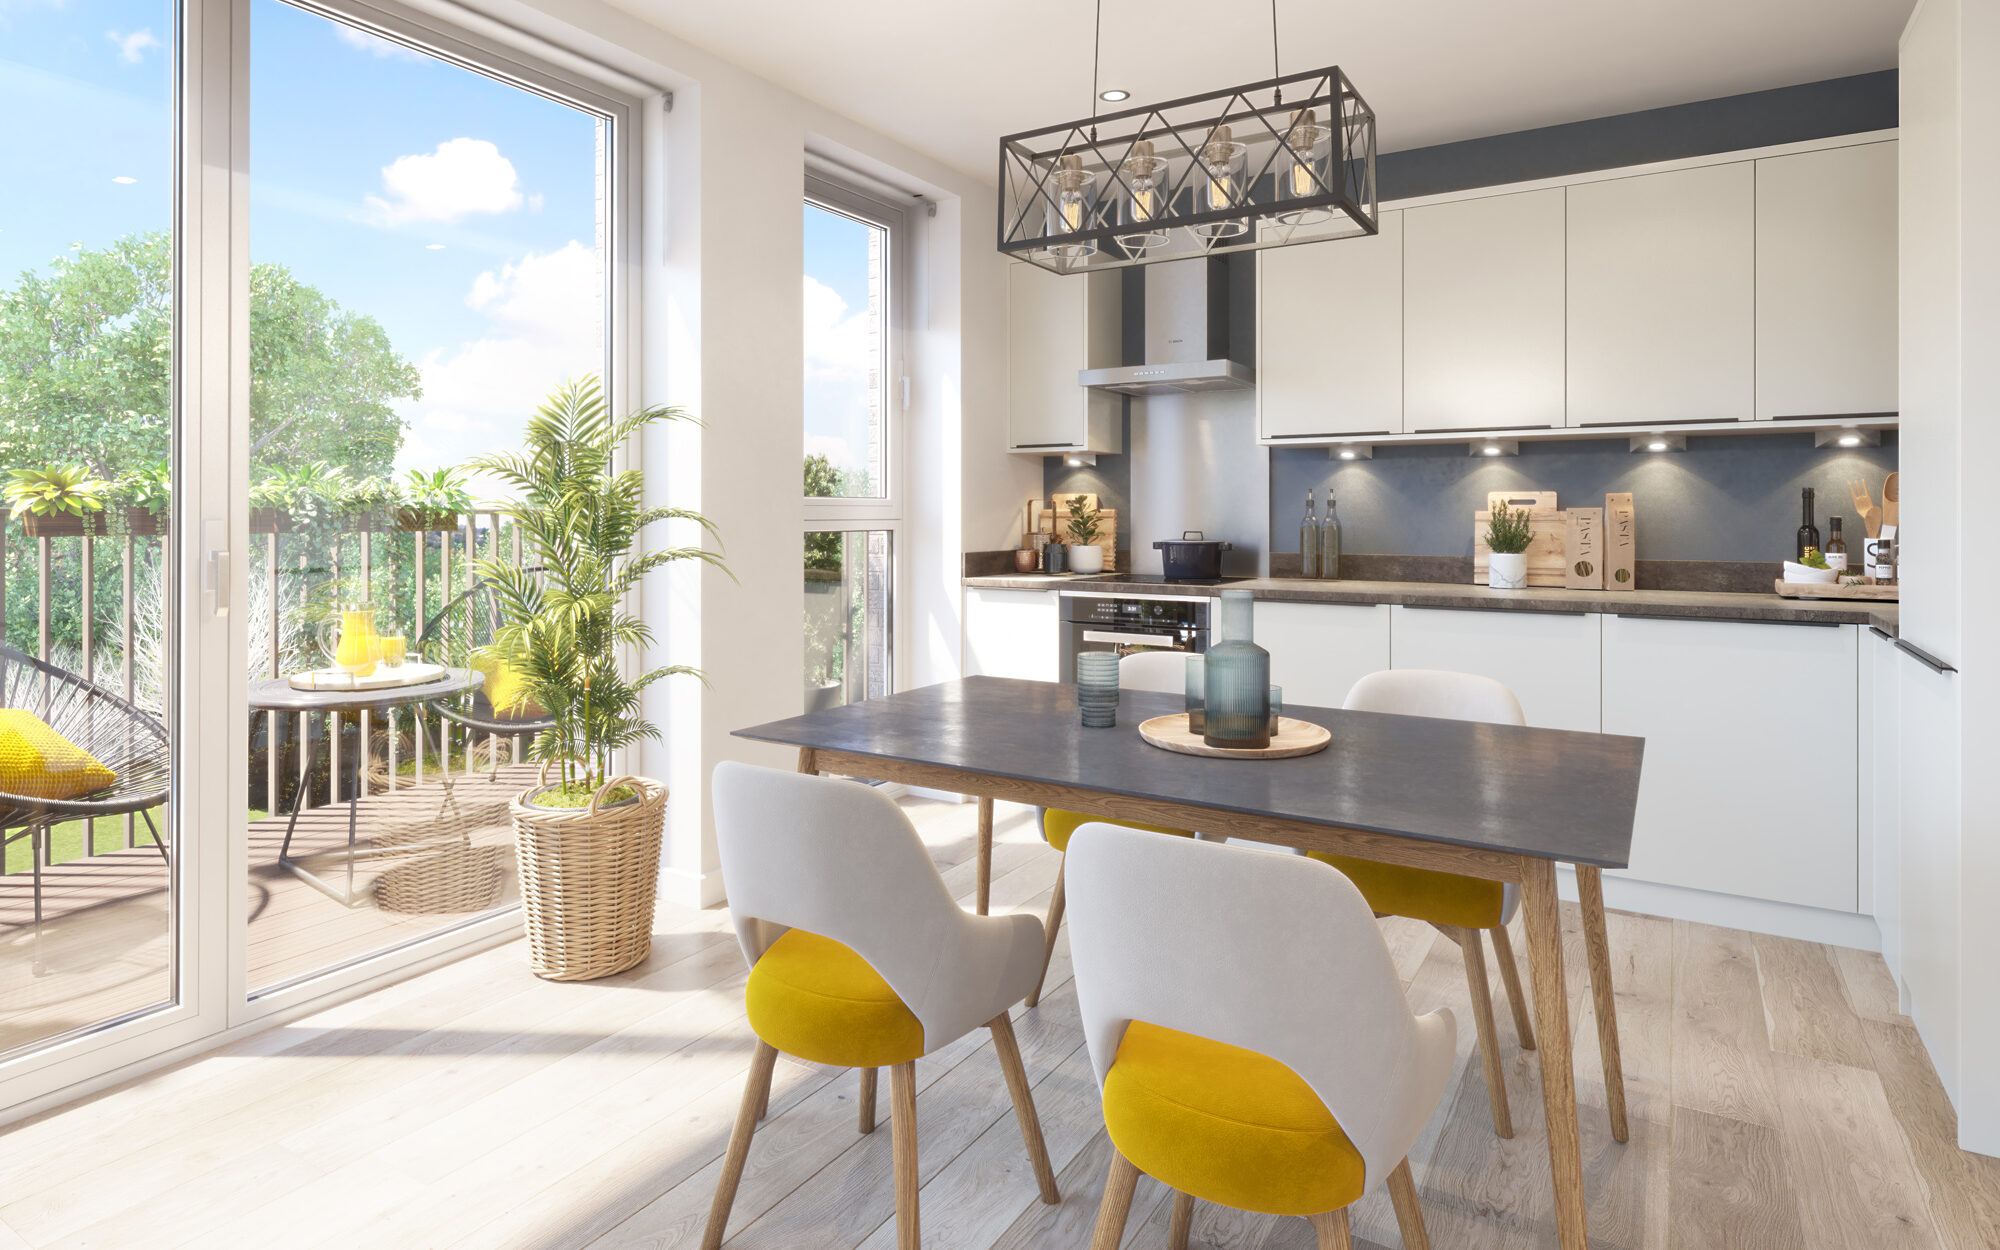 A CGI image of Signal Park by Guinness Homes - available to purchase through Shared Ownership on Share to Buy!